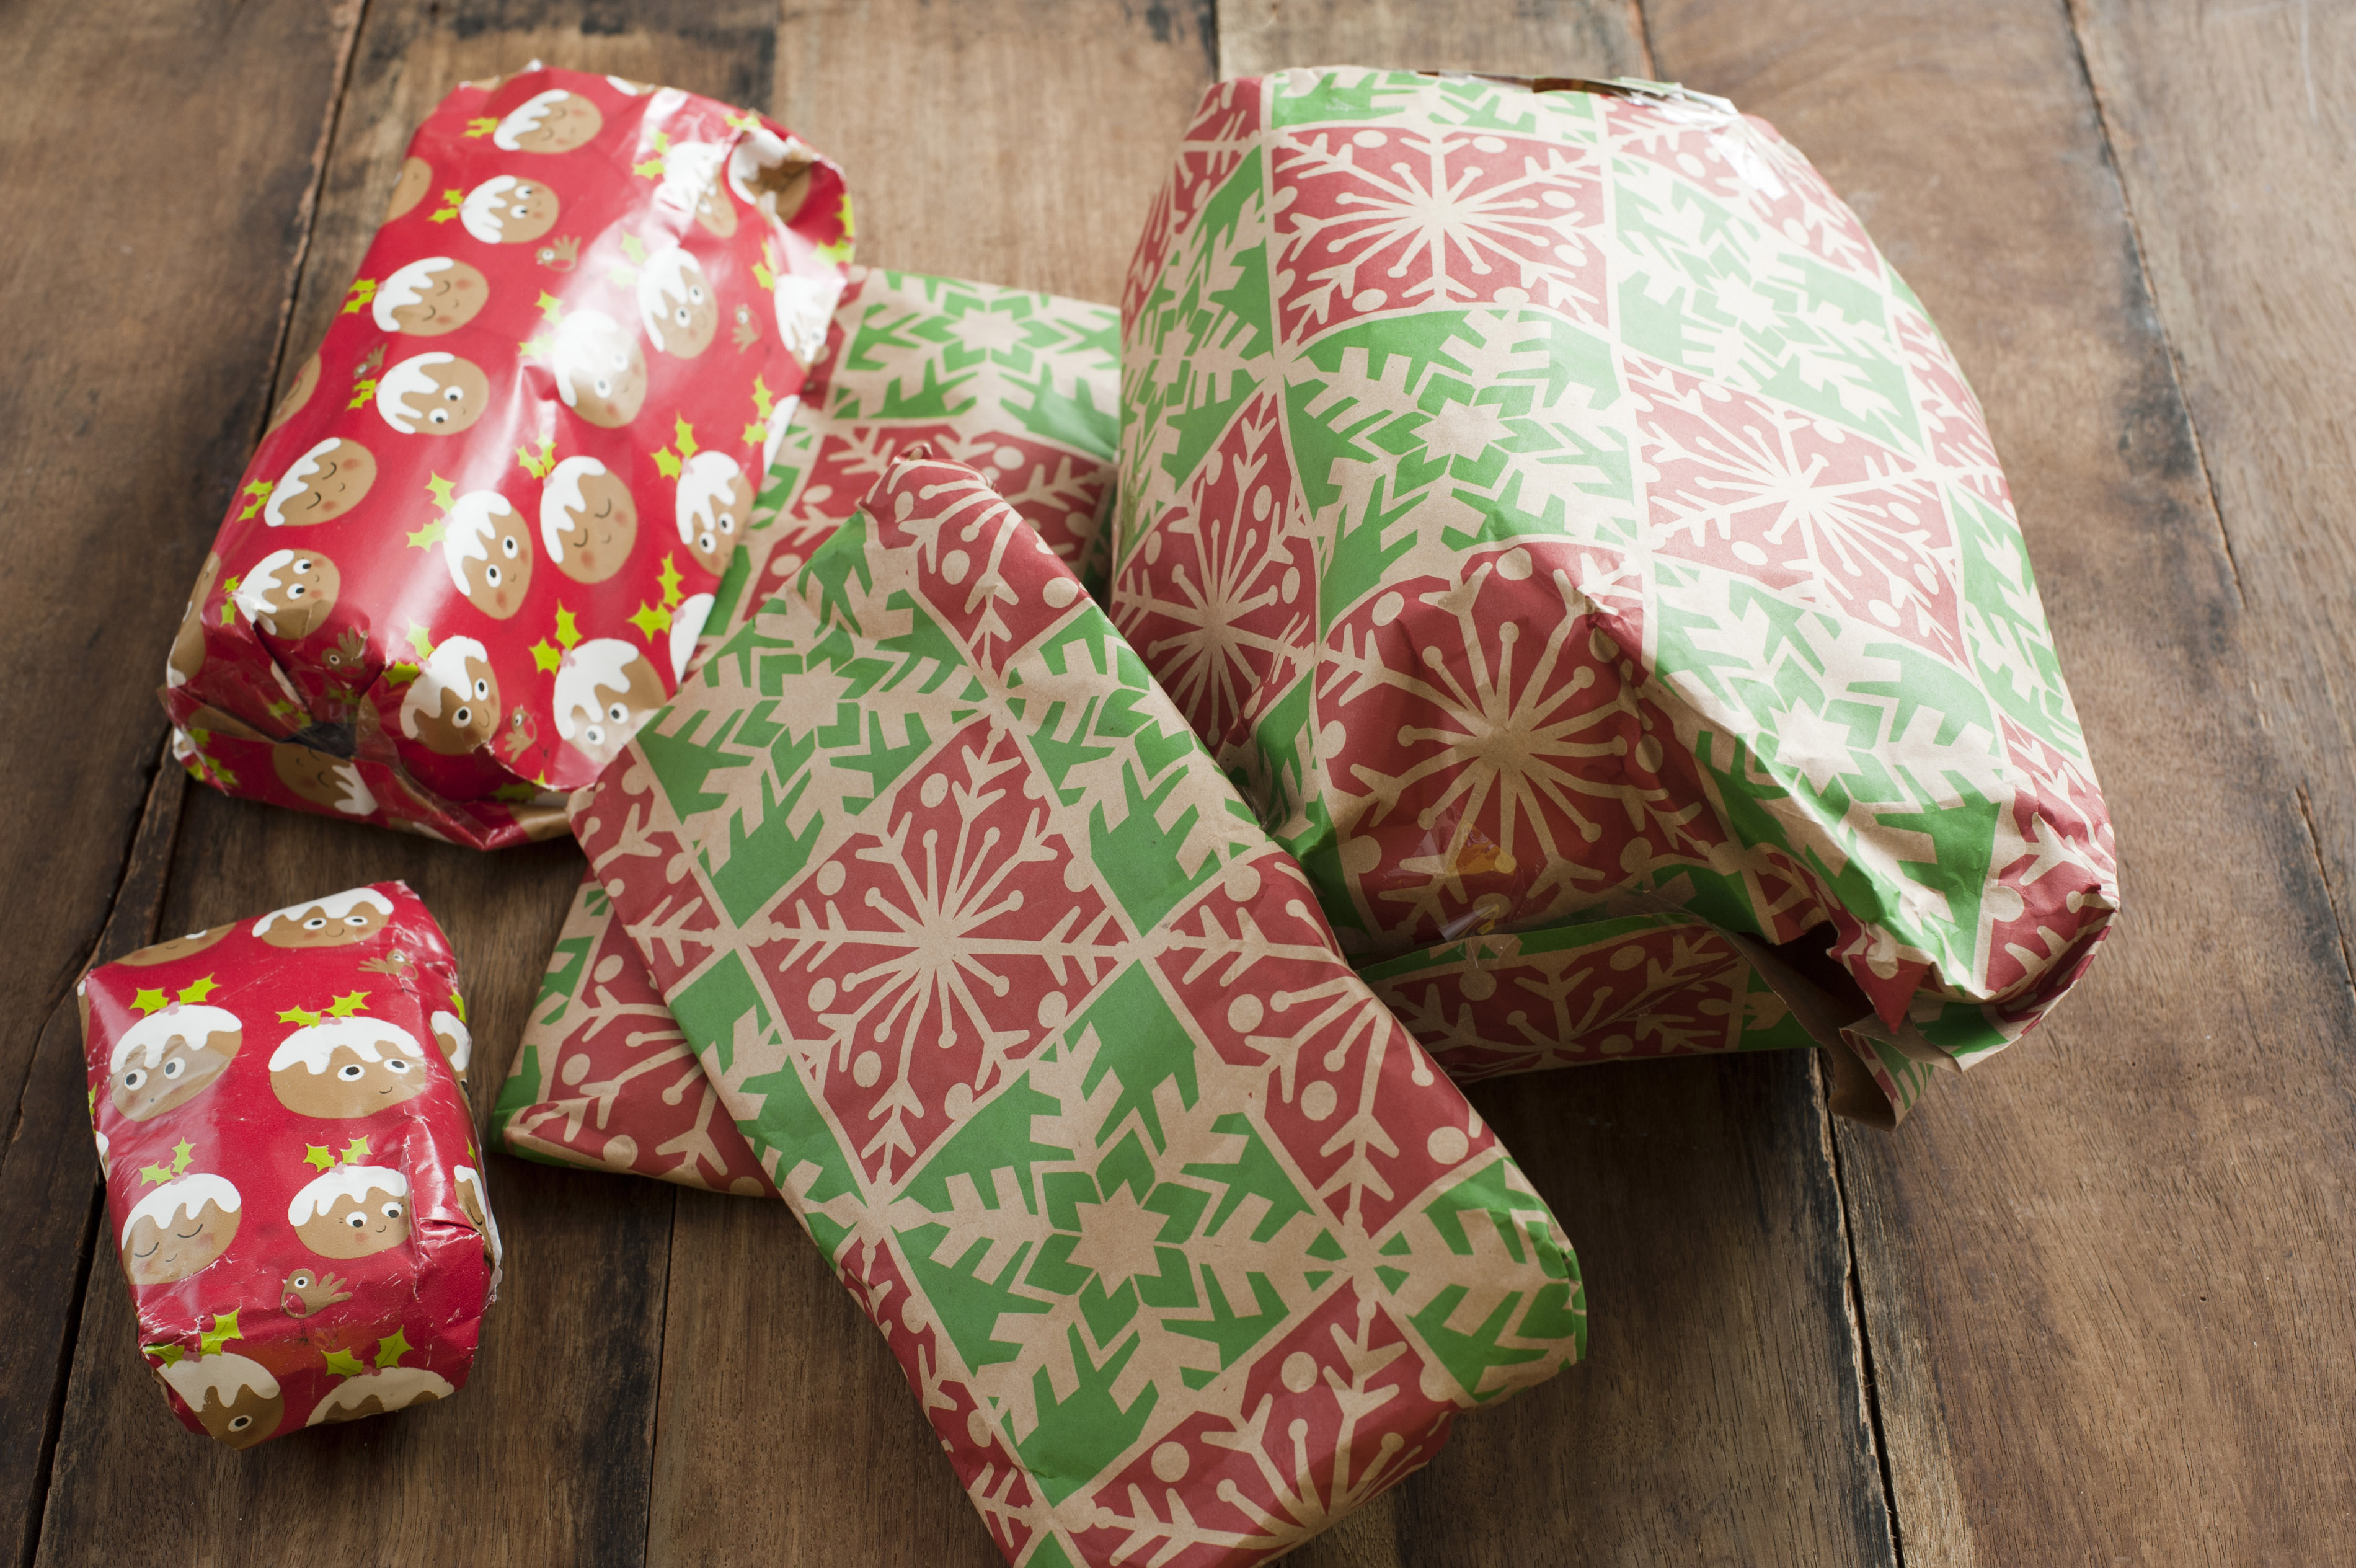 Free Stock Photo 17279 Pile of Christmas wrapped gifts on a wooden